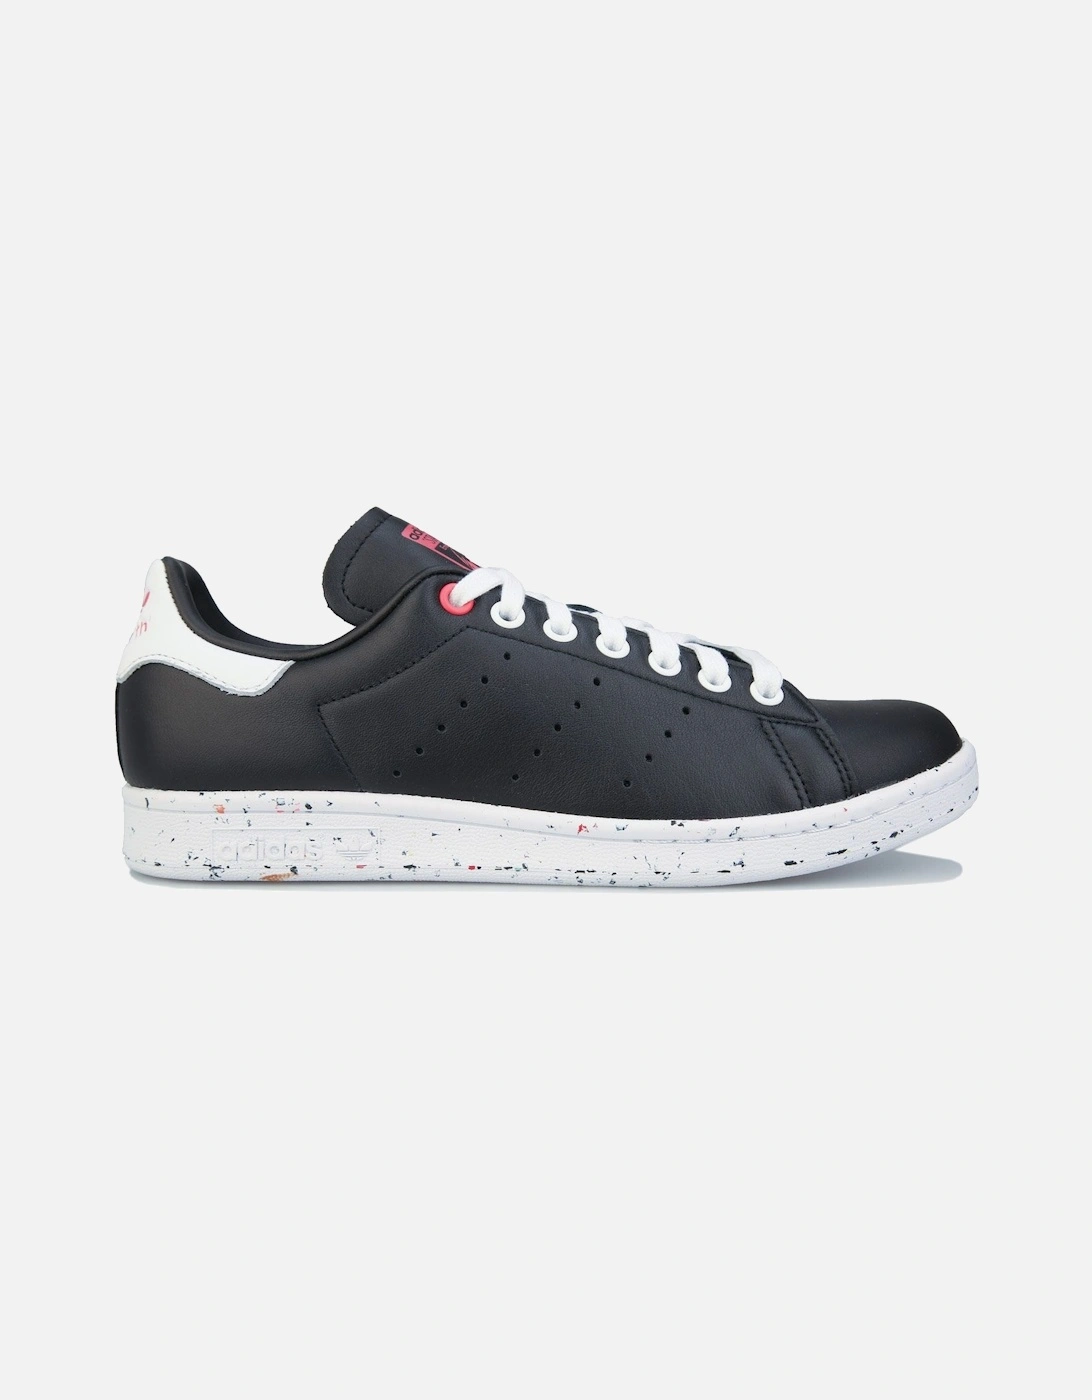 Women's Stan Smith Trainers - Womens Stan Smith Trainers - Black/Multi-Colour/Multi/Black-White- [Size: UK 3.5 only]